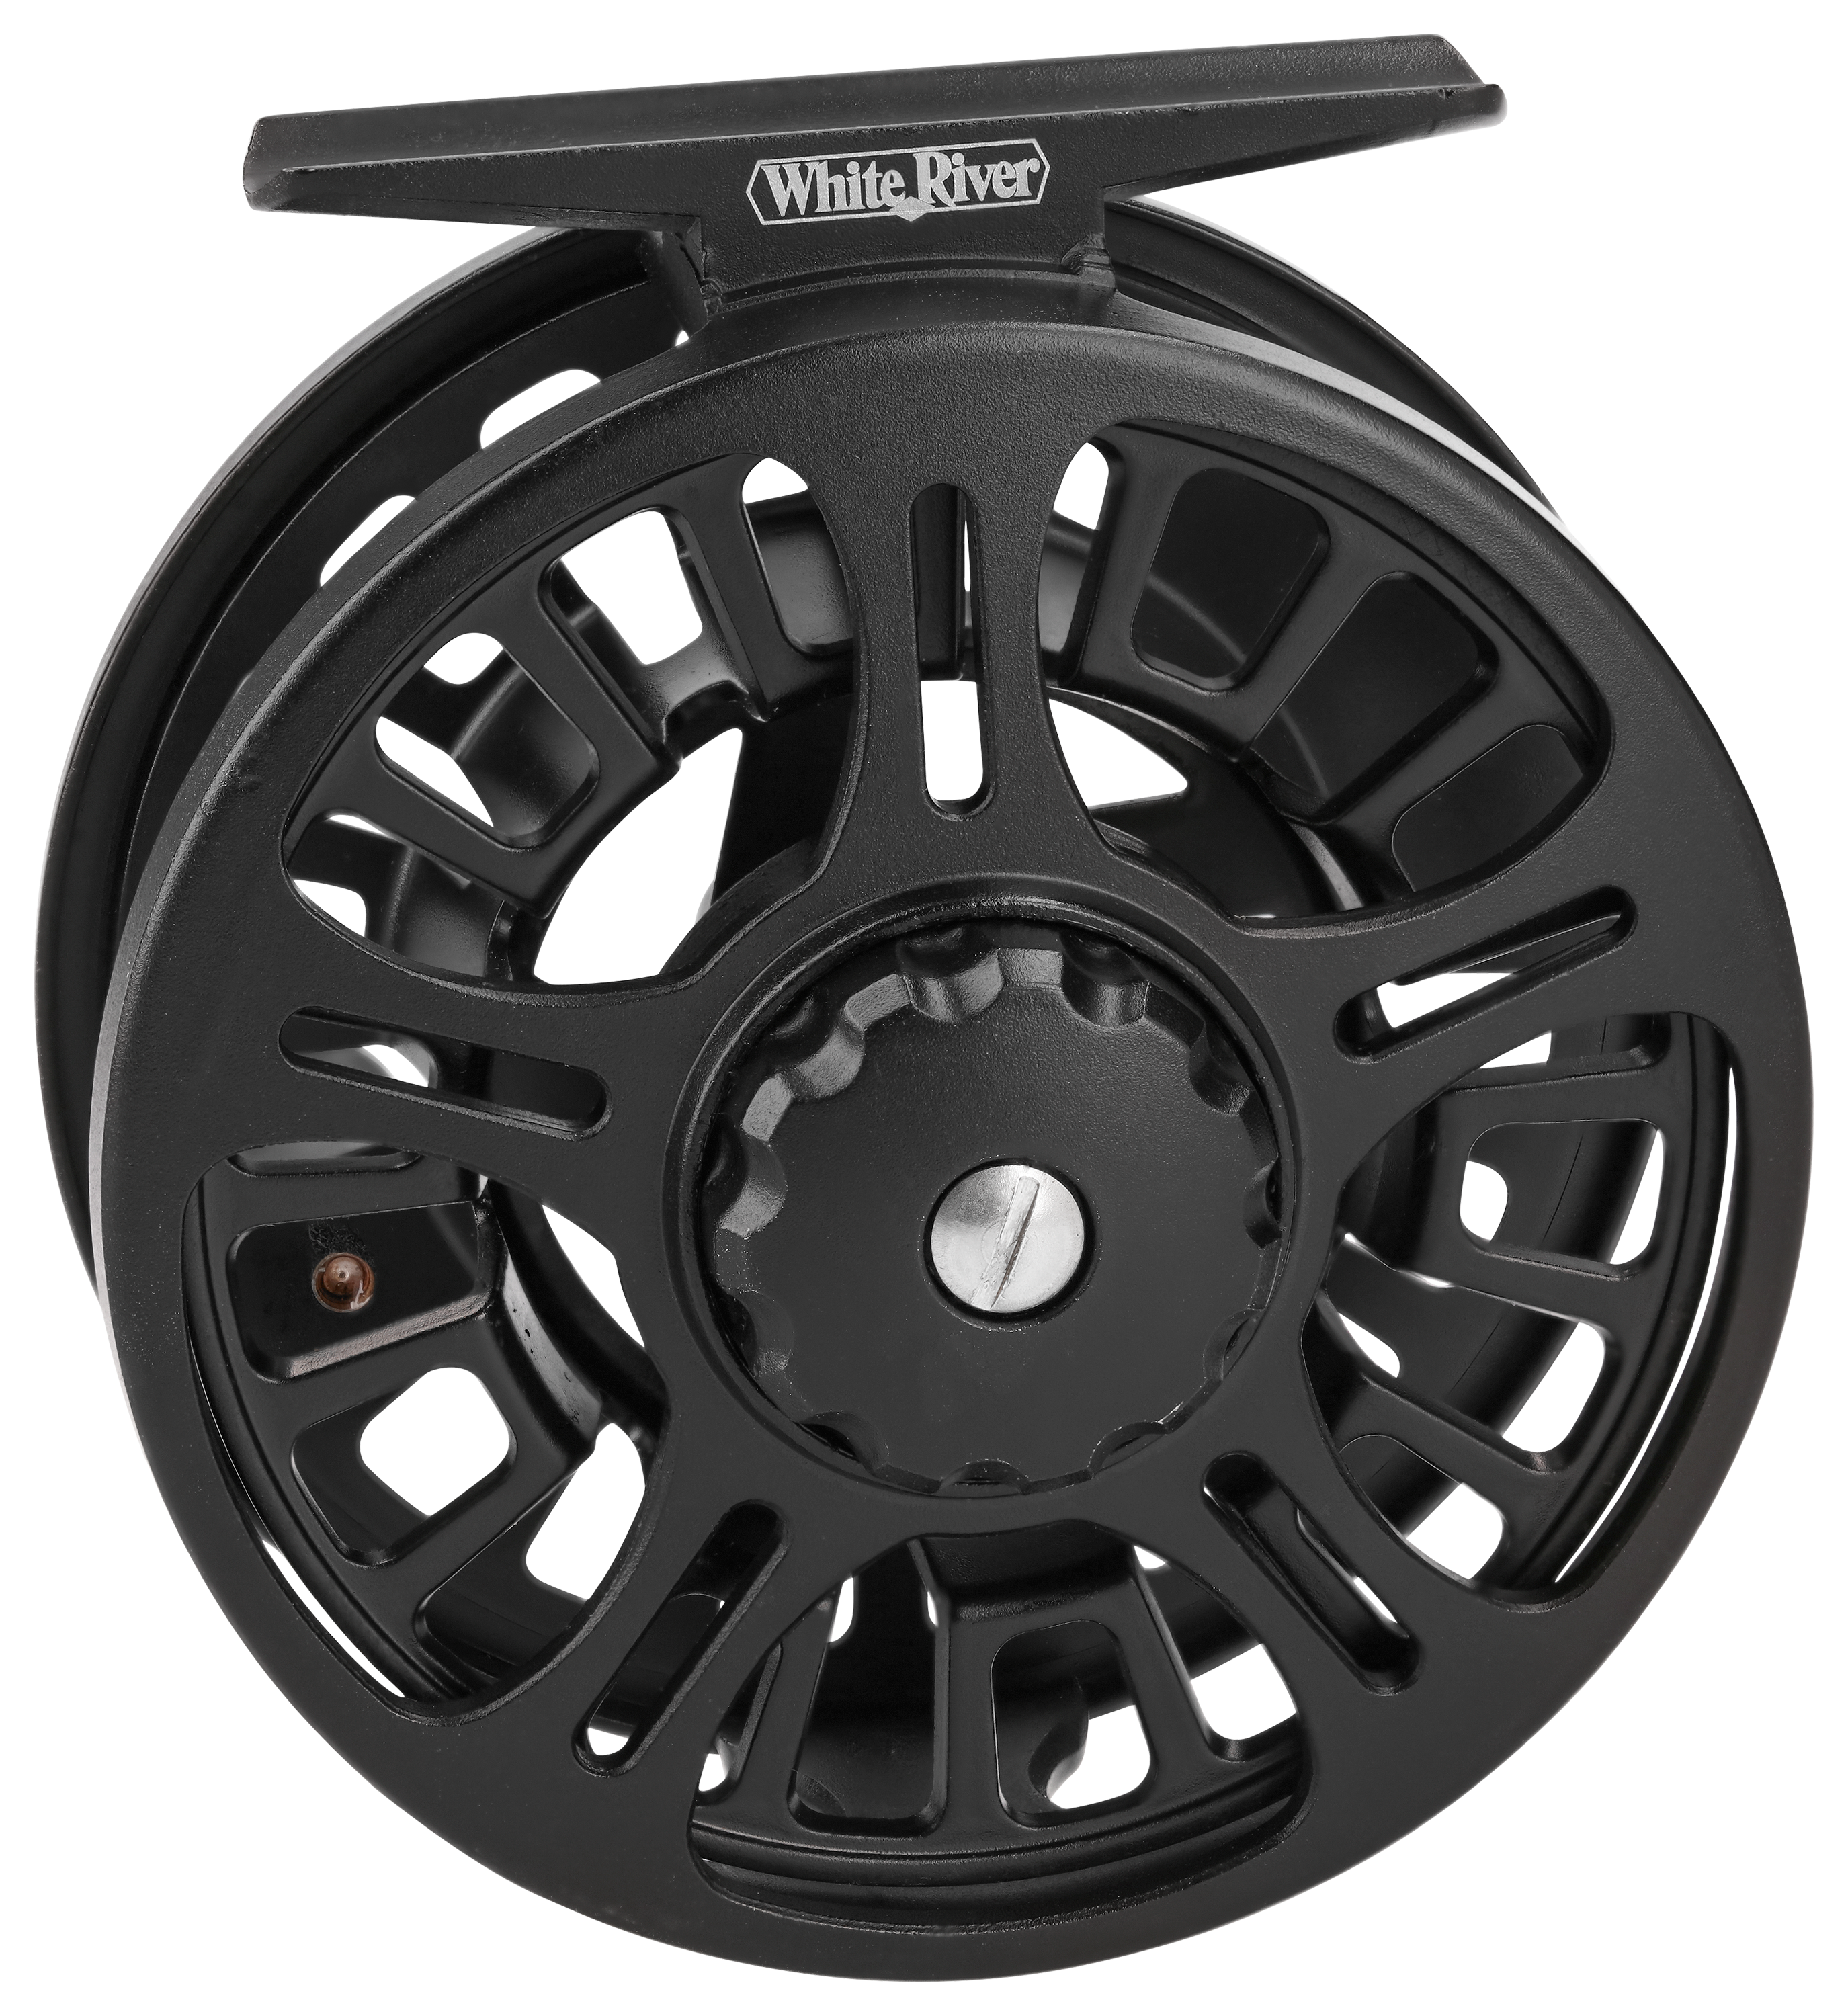 White River Fly Shop Dogwood Canyon Fly Reel - DGW78